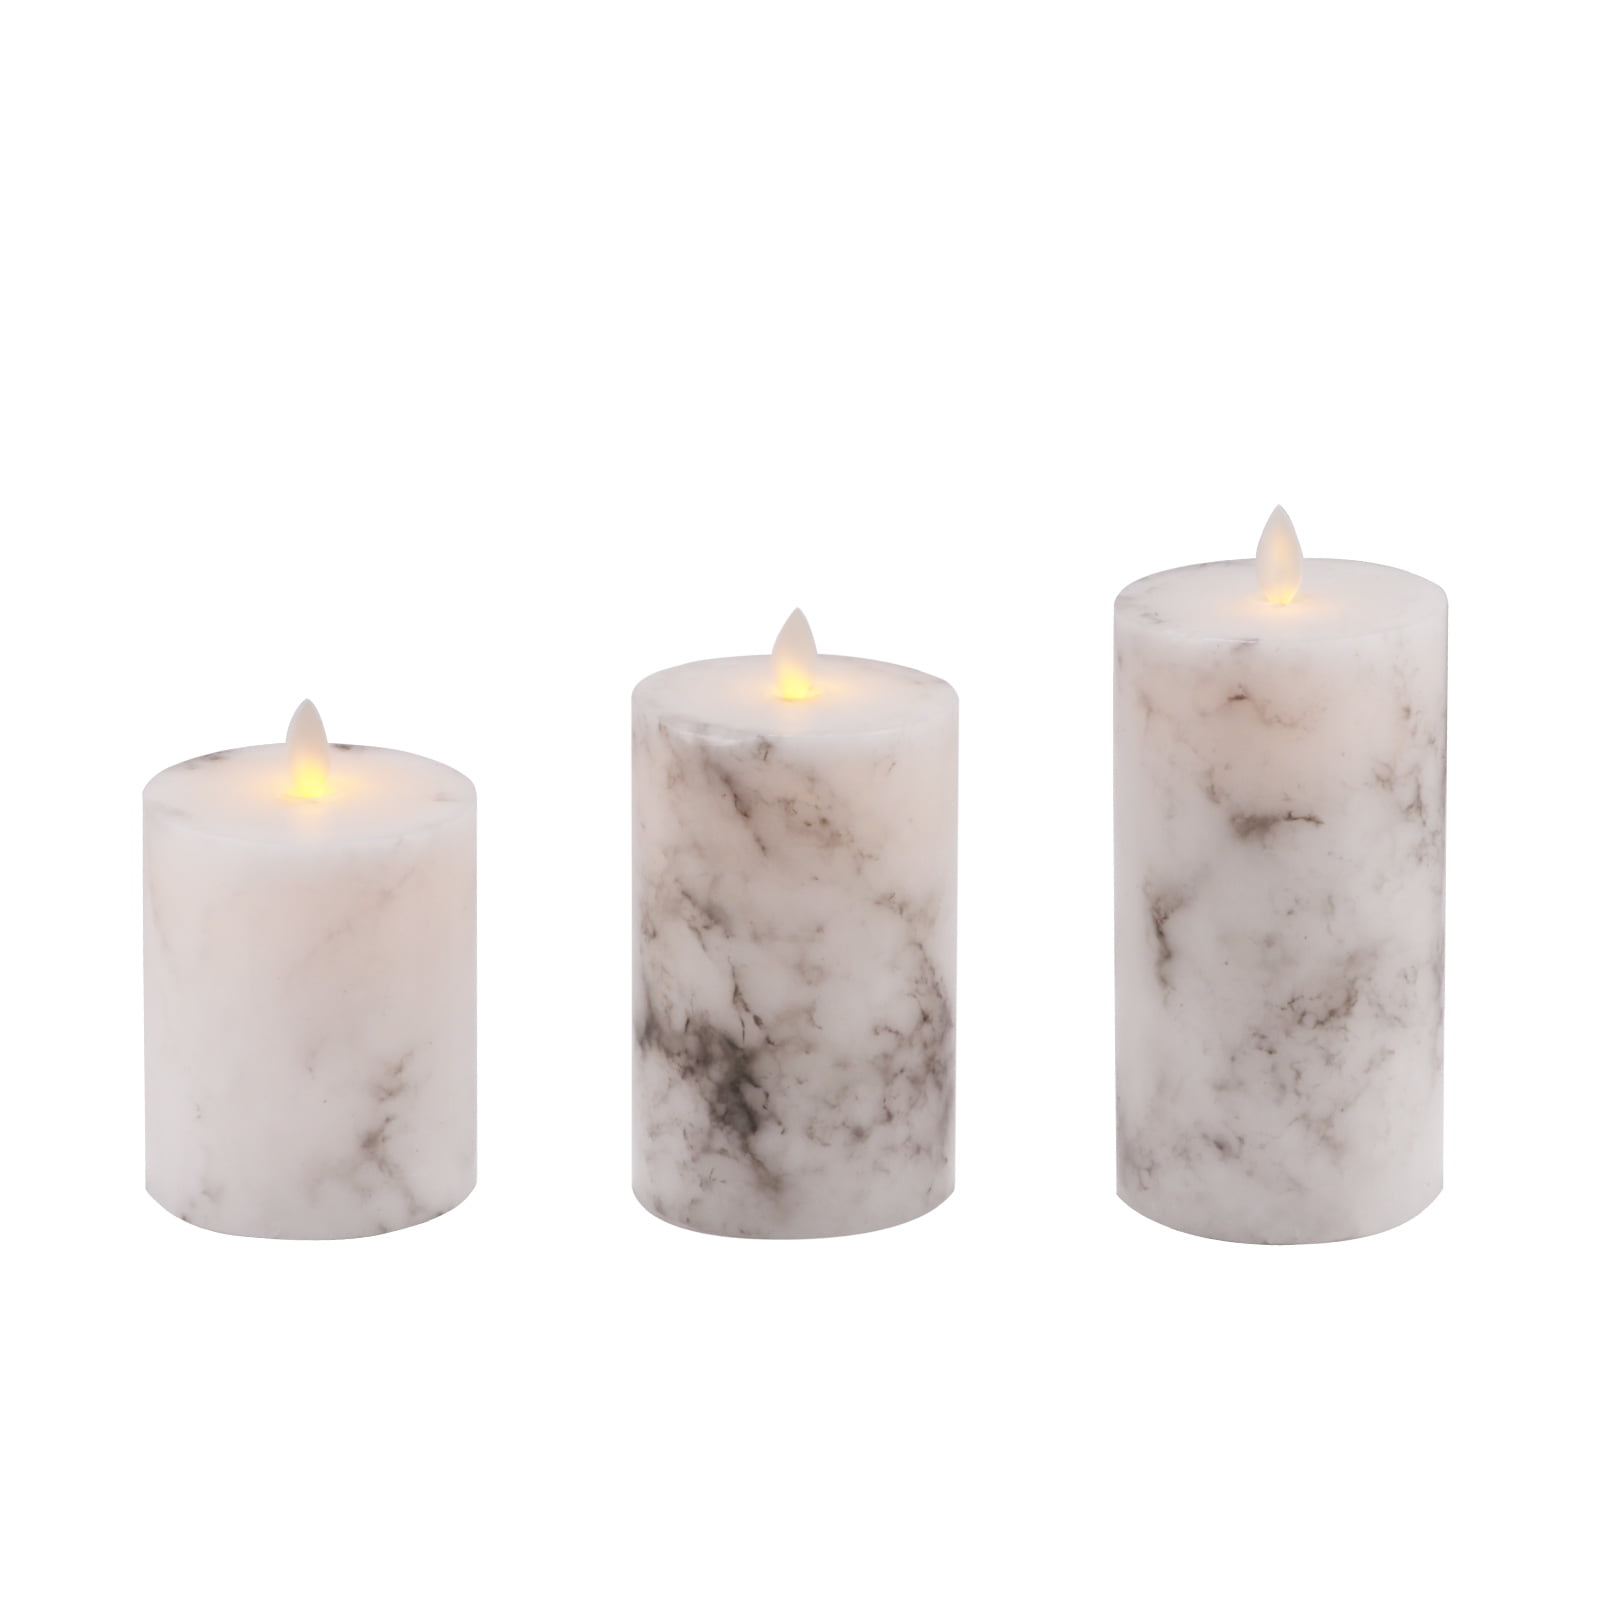 D:3.25 X H:4 5 6 Aongray LED Maple Leaf Candle Lights Pack of 3 Flameless Candles Battery Operated Pillar Real Wax Flickering Moving Wick Electric Candle Set with 10 Key Remote Control